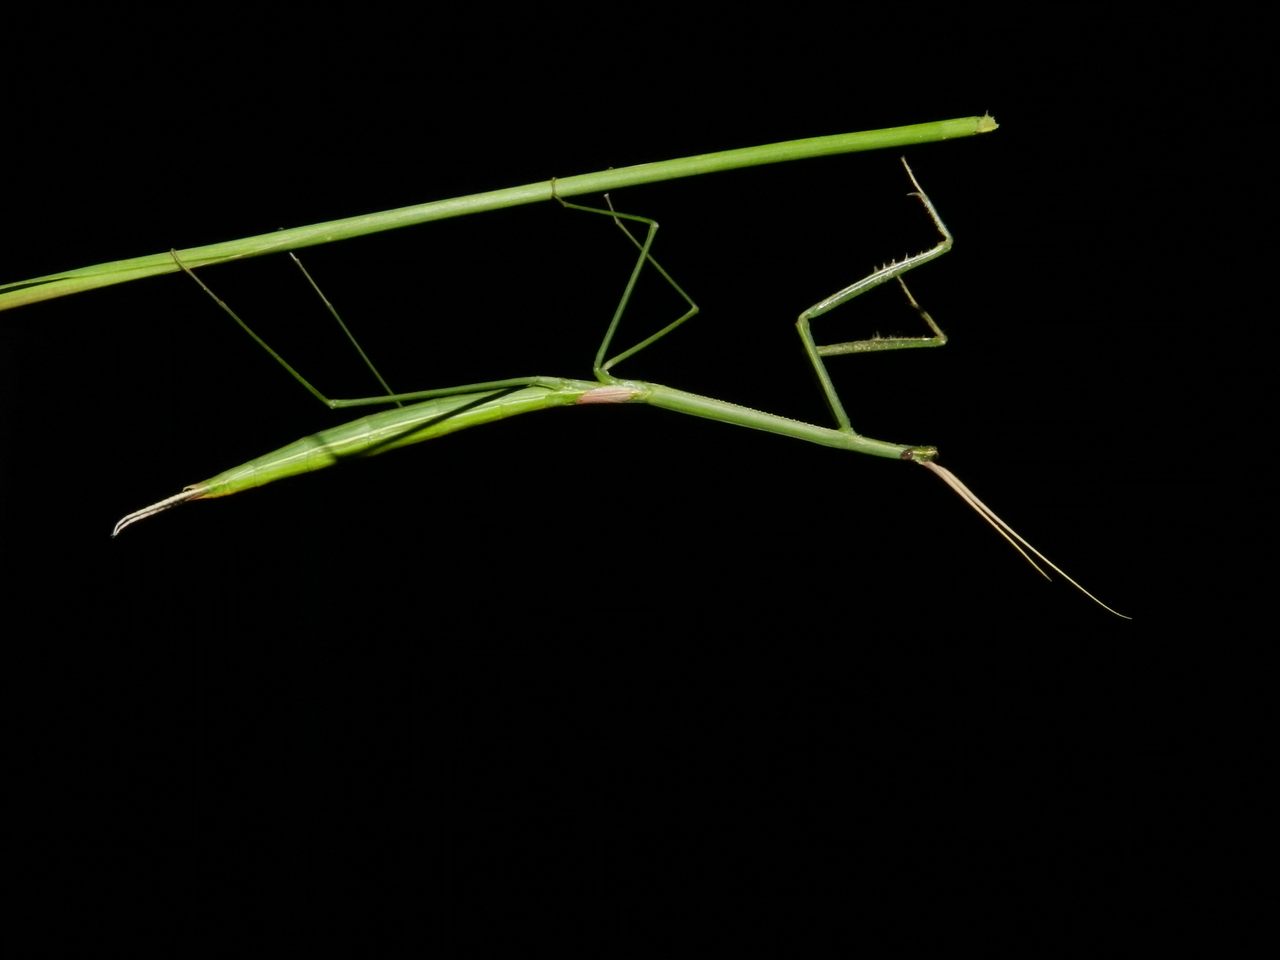 A female small-winged stick mantis (Brunneria subaptera).